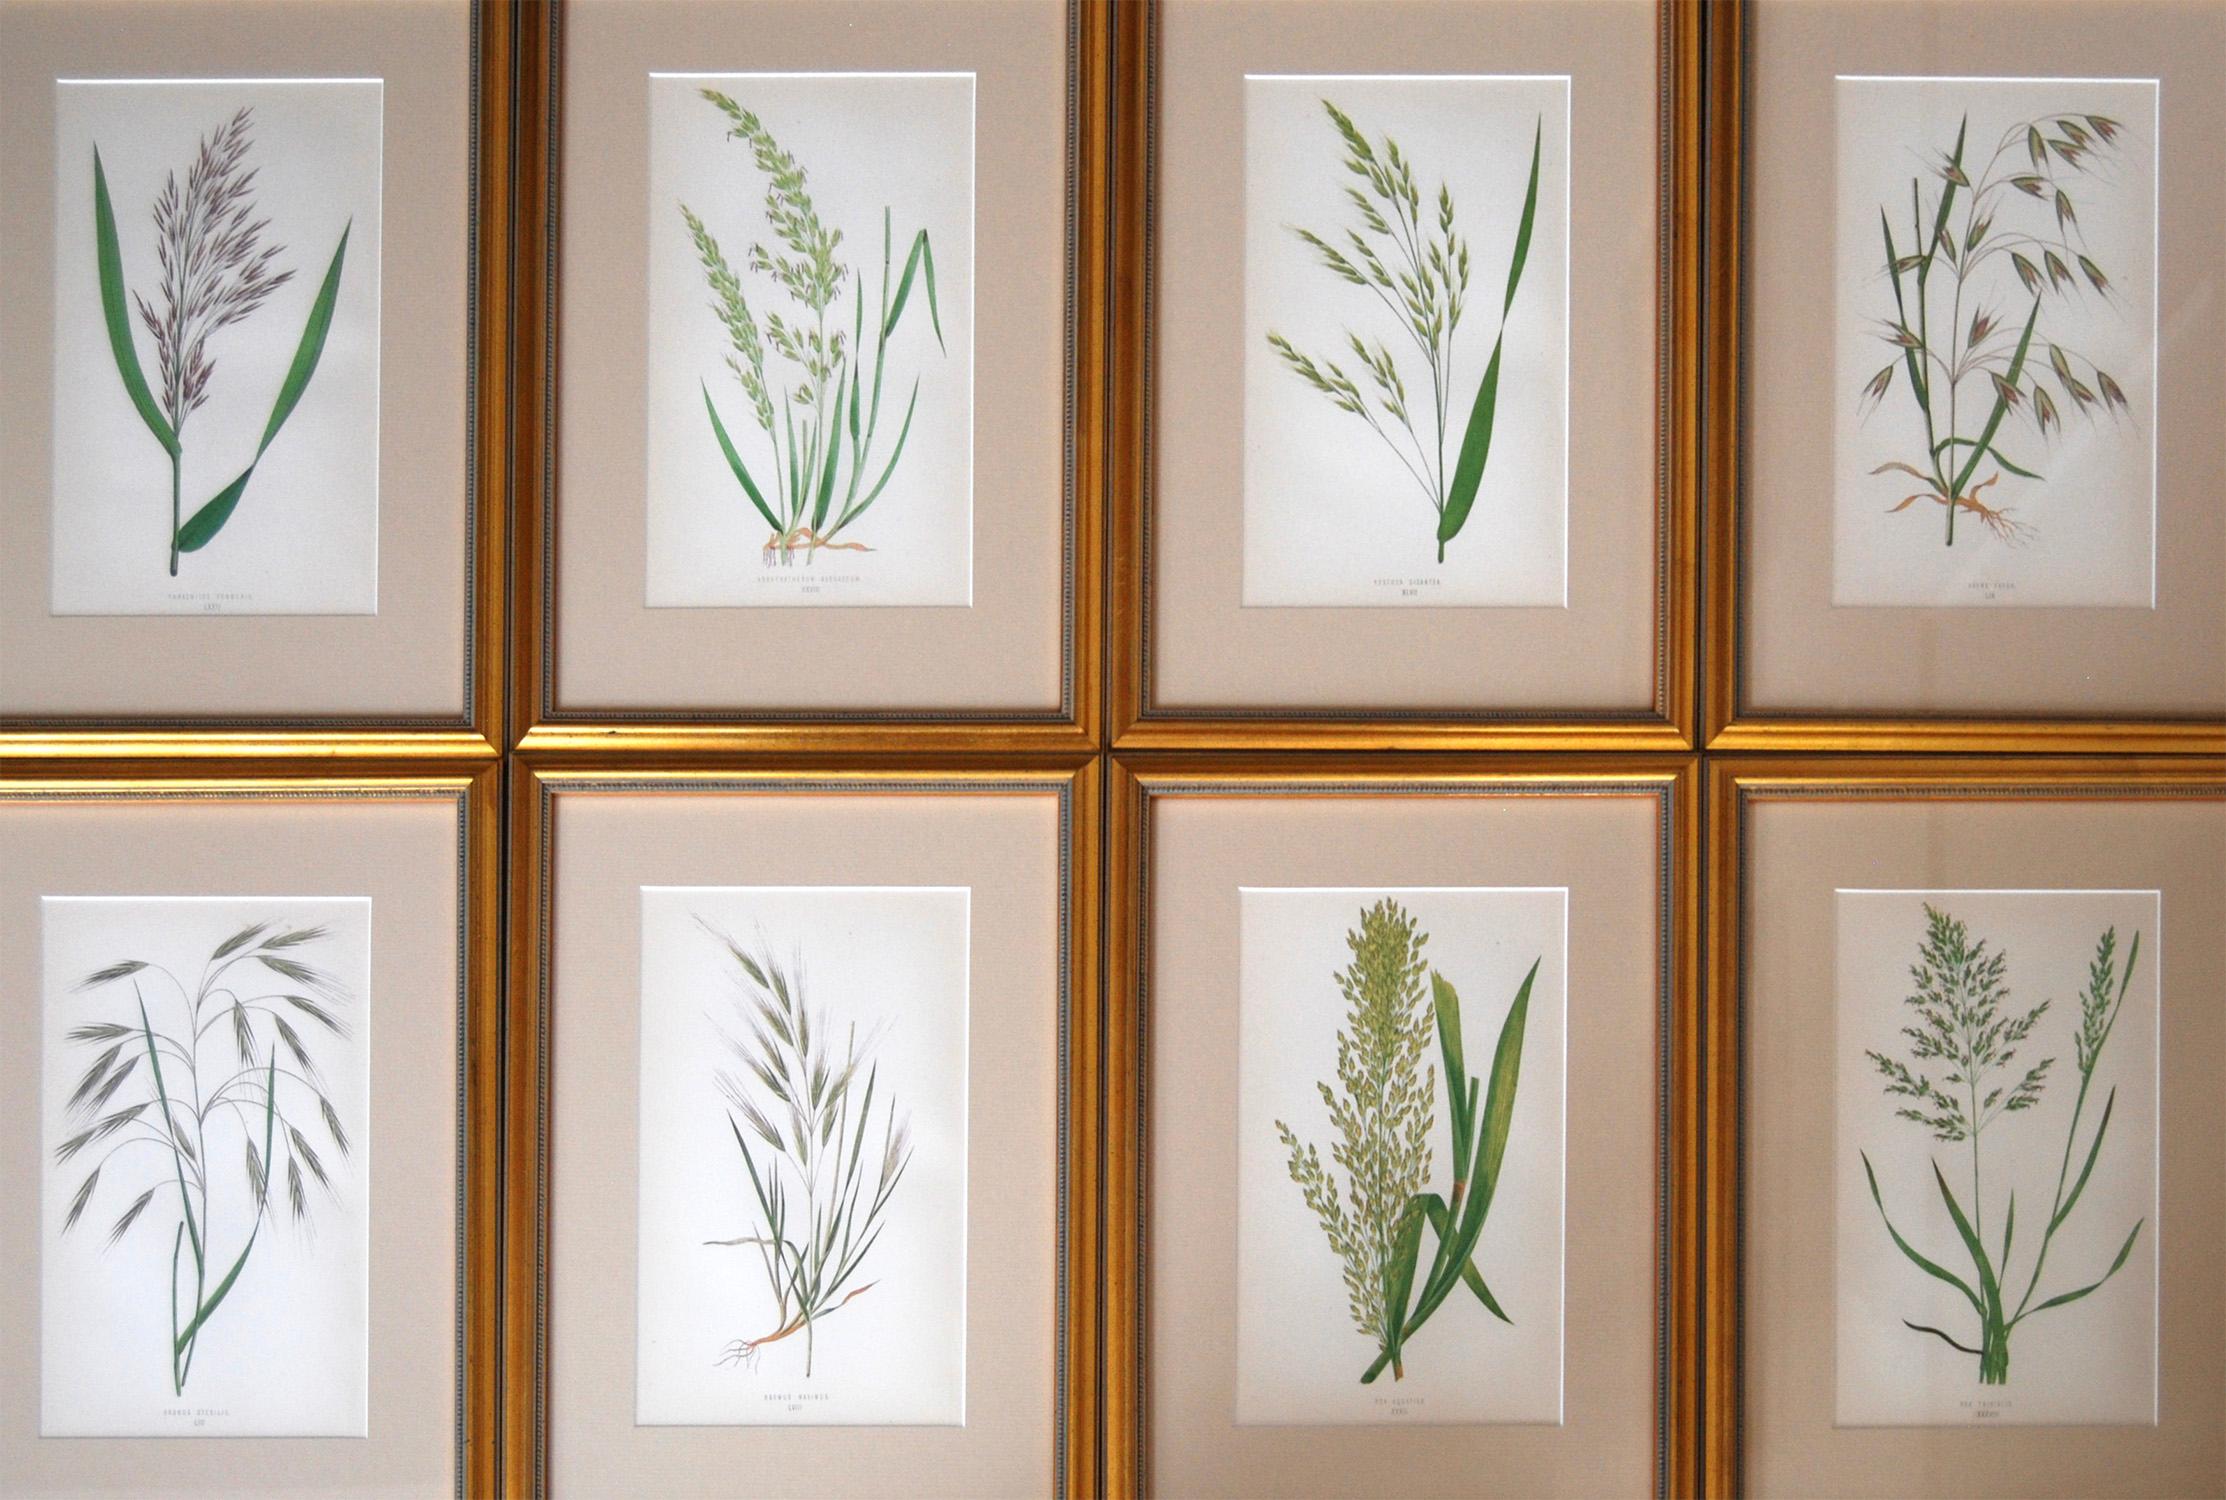 A set of 12 botanical handcolored grasses prints by E.J. Lowe dating from 1868. Presented in bespoke frames behind TruVu glass which gives some protection to the print and cuts reflection affording a clearer view of the subject matter.